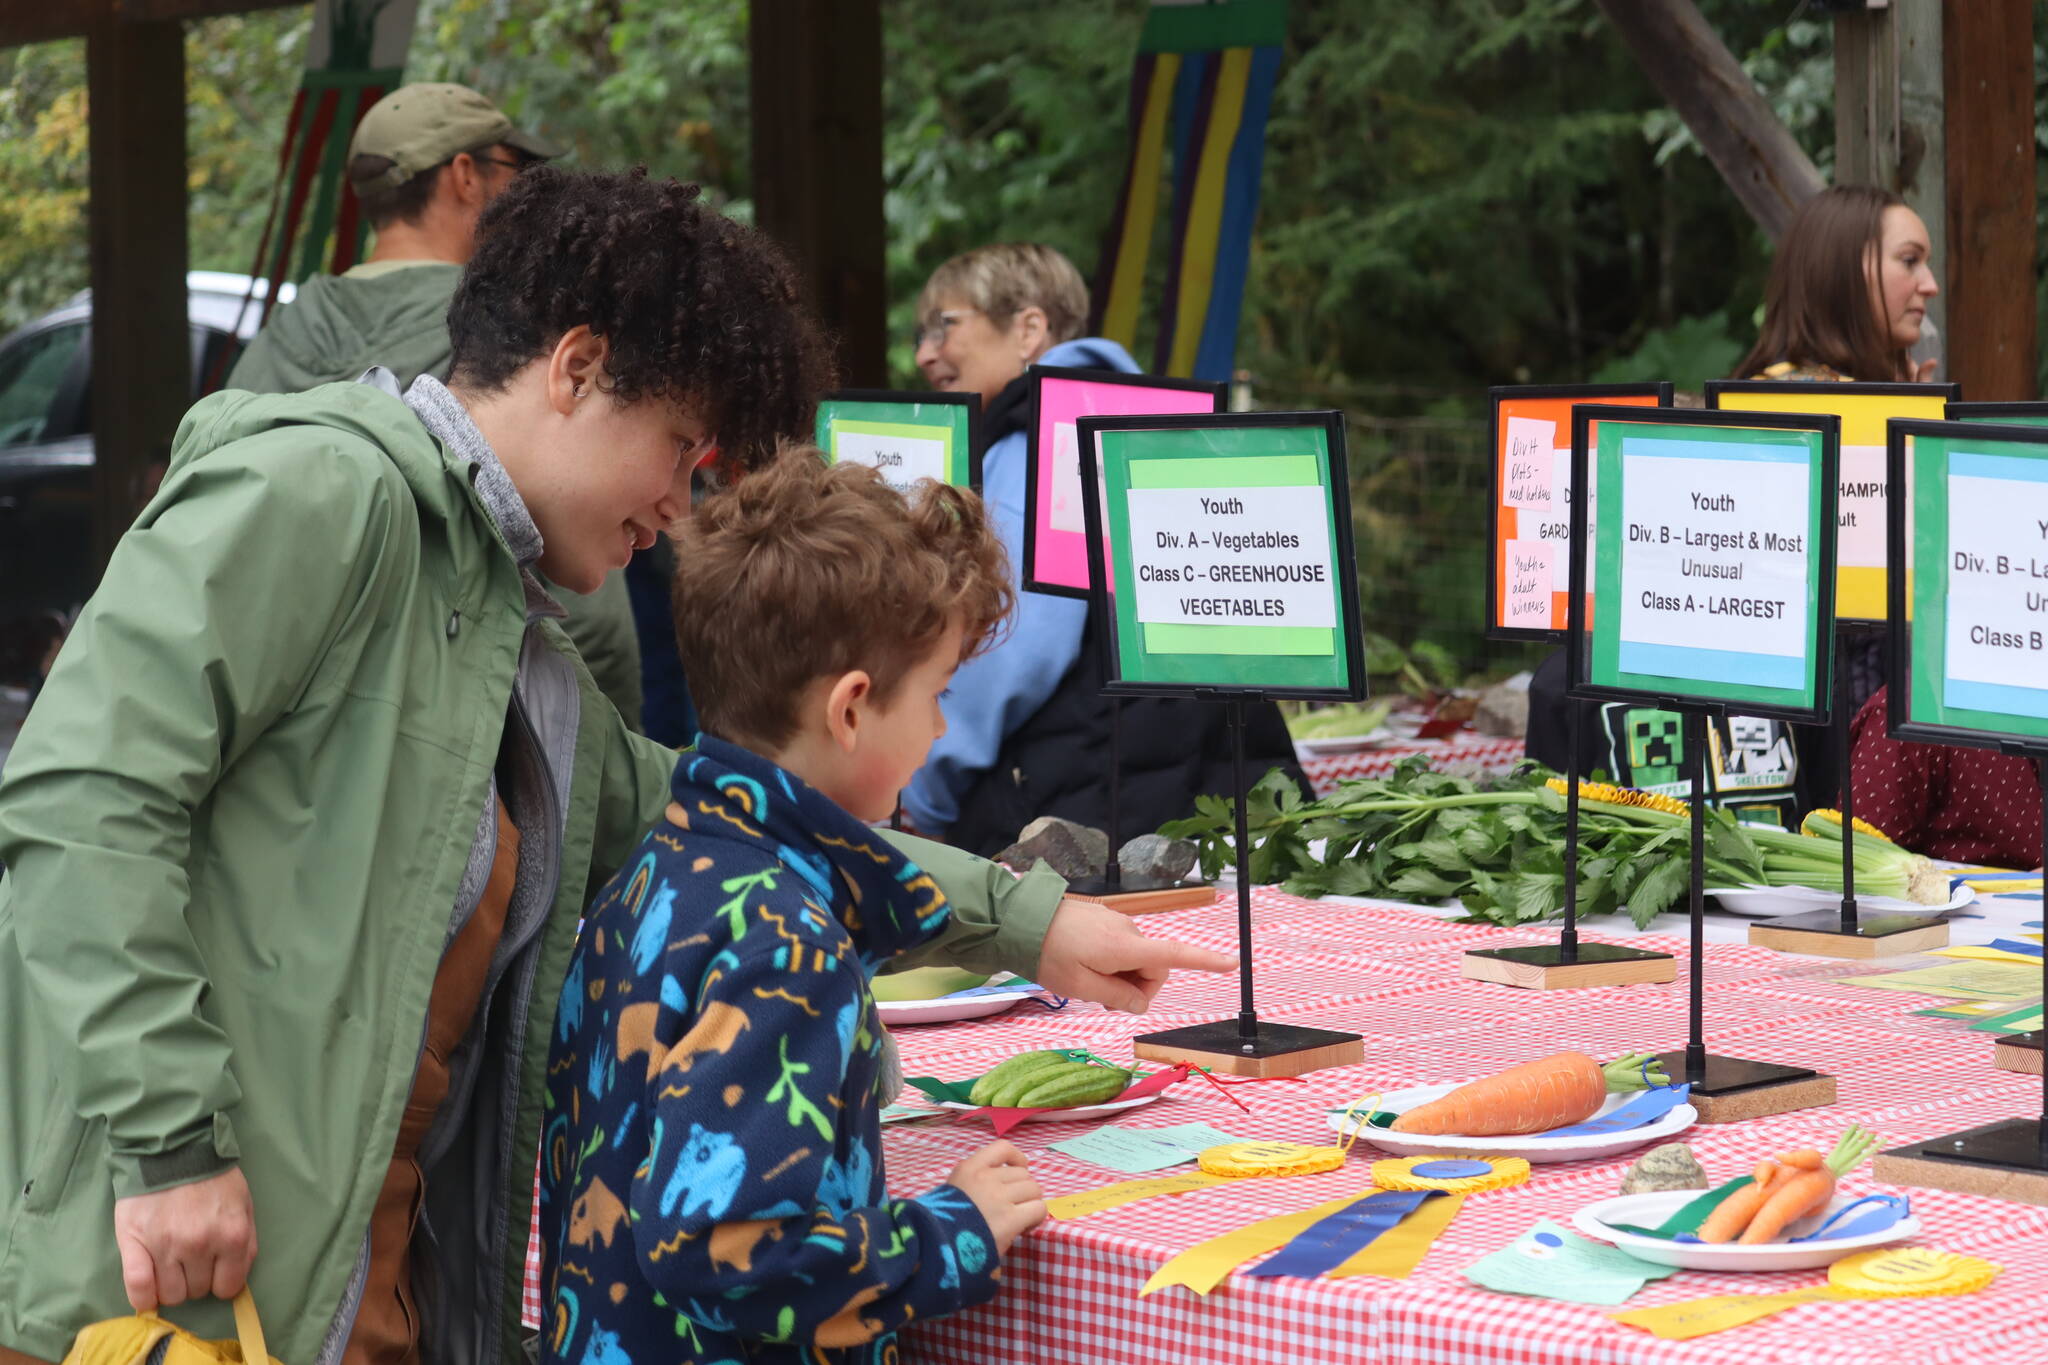 Categories for prizes were divided into adult and youth awards and chosen early in the morning before the public arrived so the winners could be on display during the Harvest Fair on Saturday. (Jonson Kuhn / Juneau Empire)